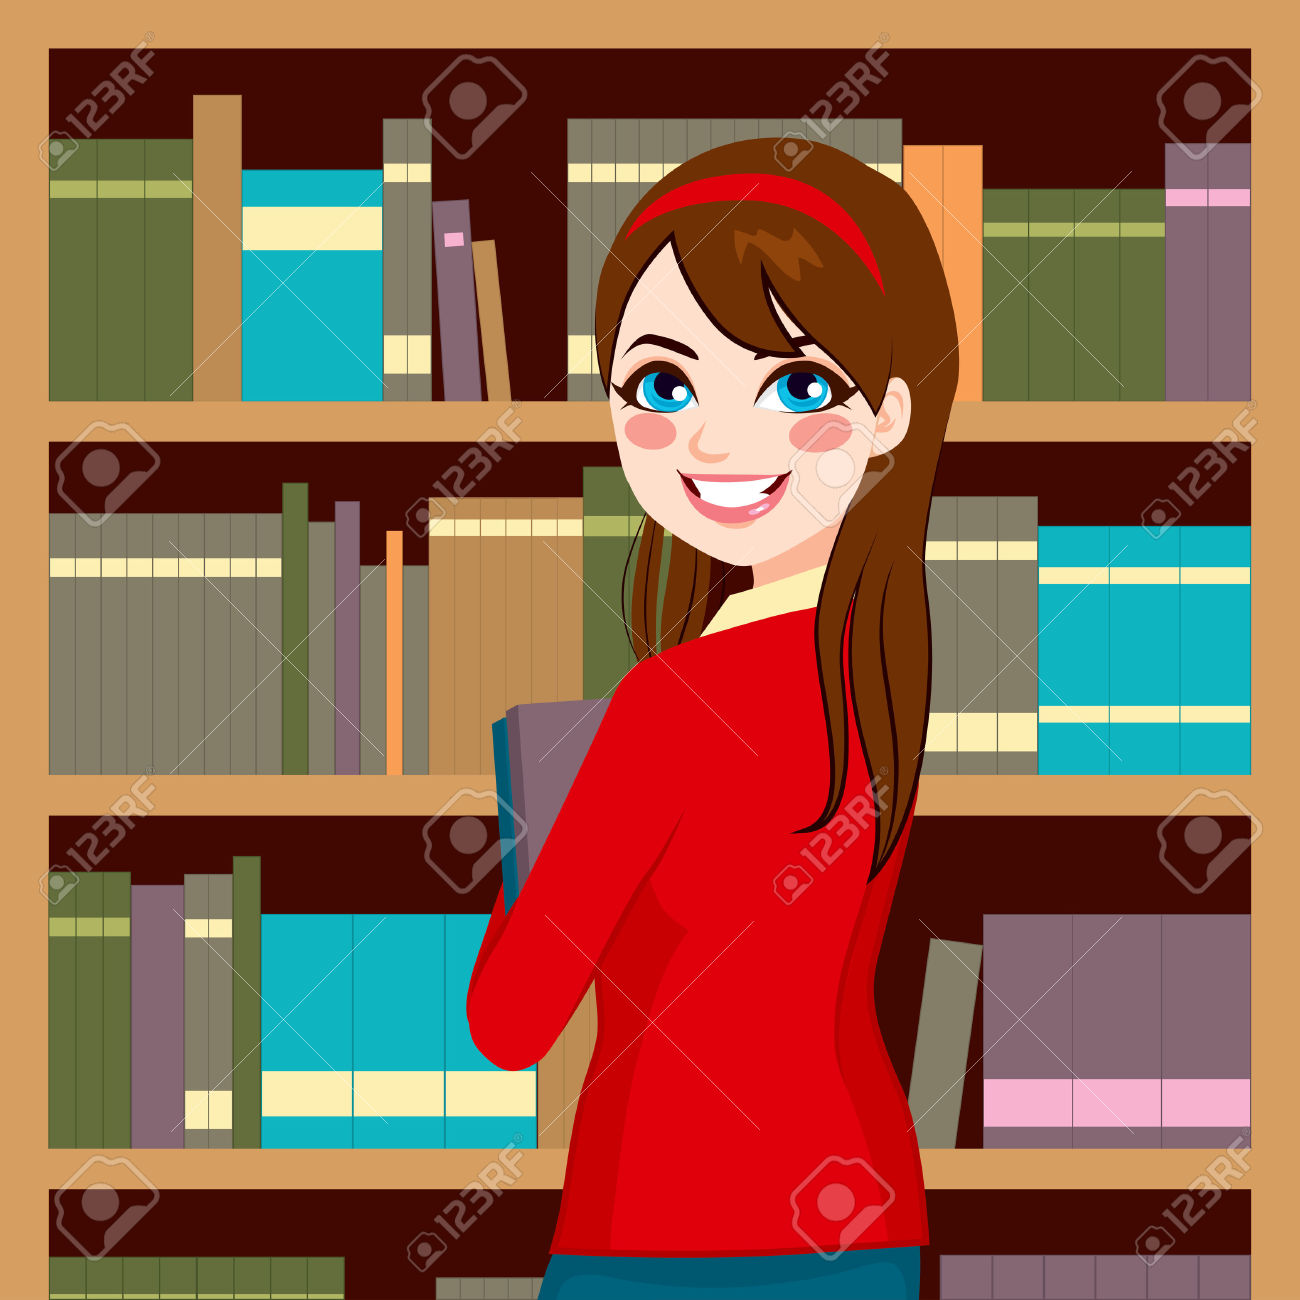 Clipart Of Young Brunette Woman Librarian.